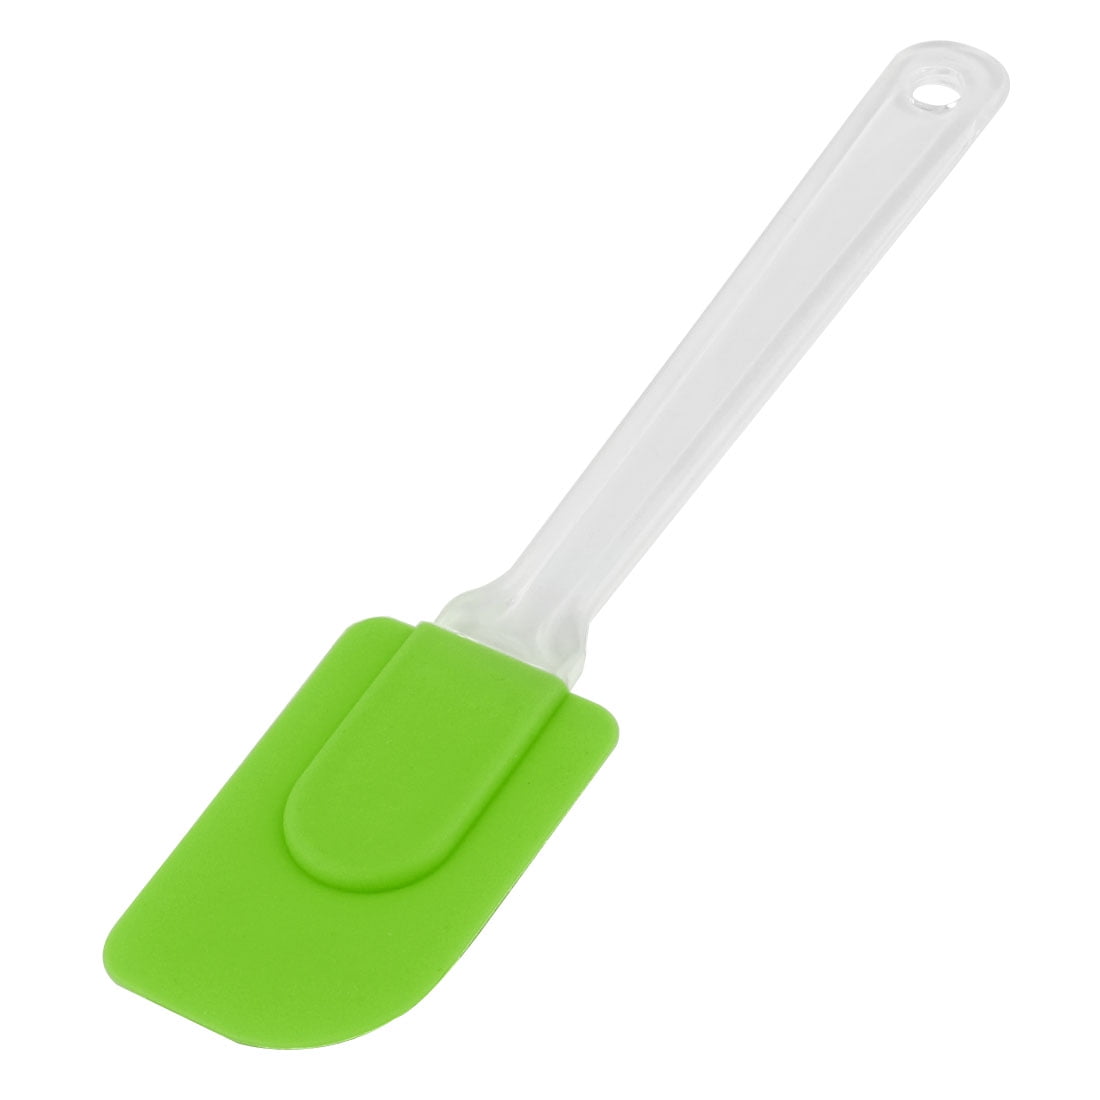 Details about   Kitchen Silicone Cake Cream Spatula Mixing Scraper Brush Butter Baking Home US 